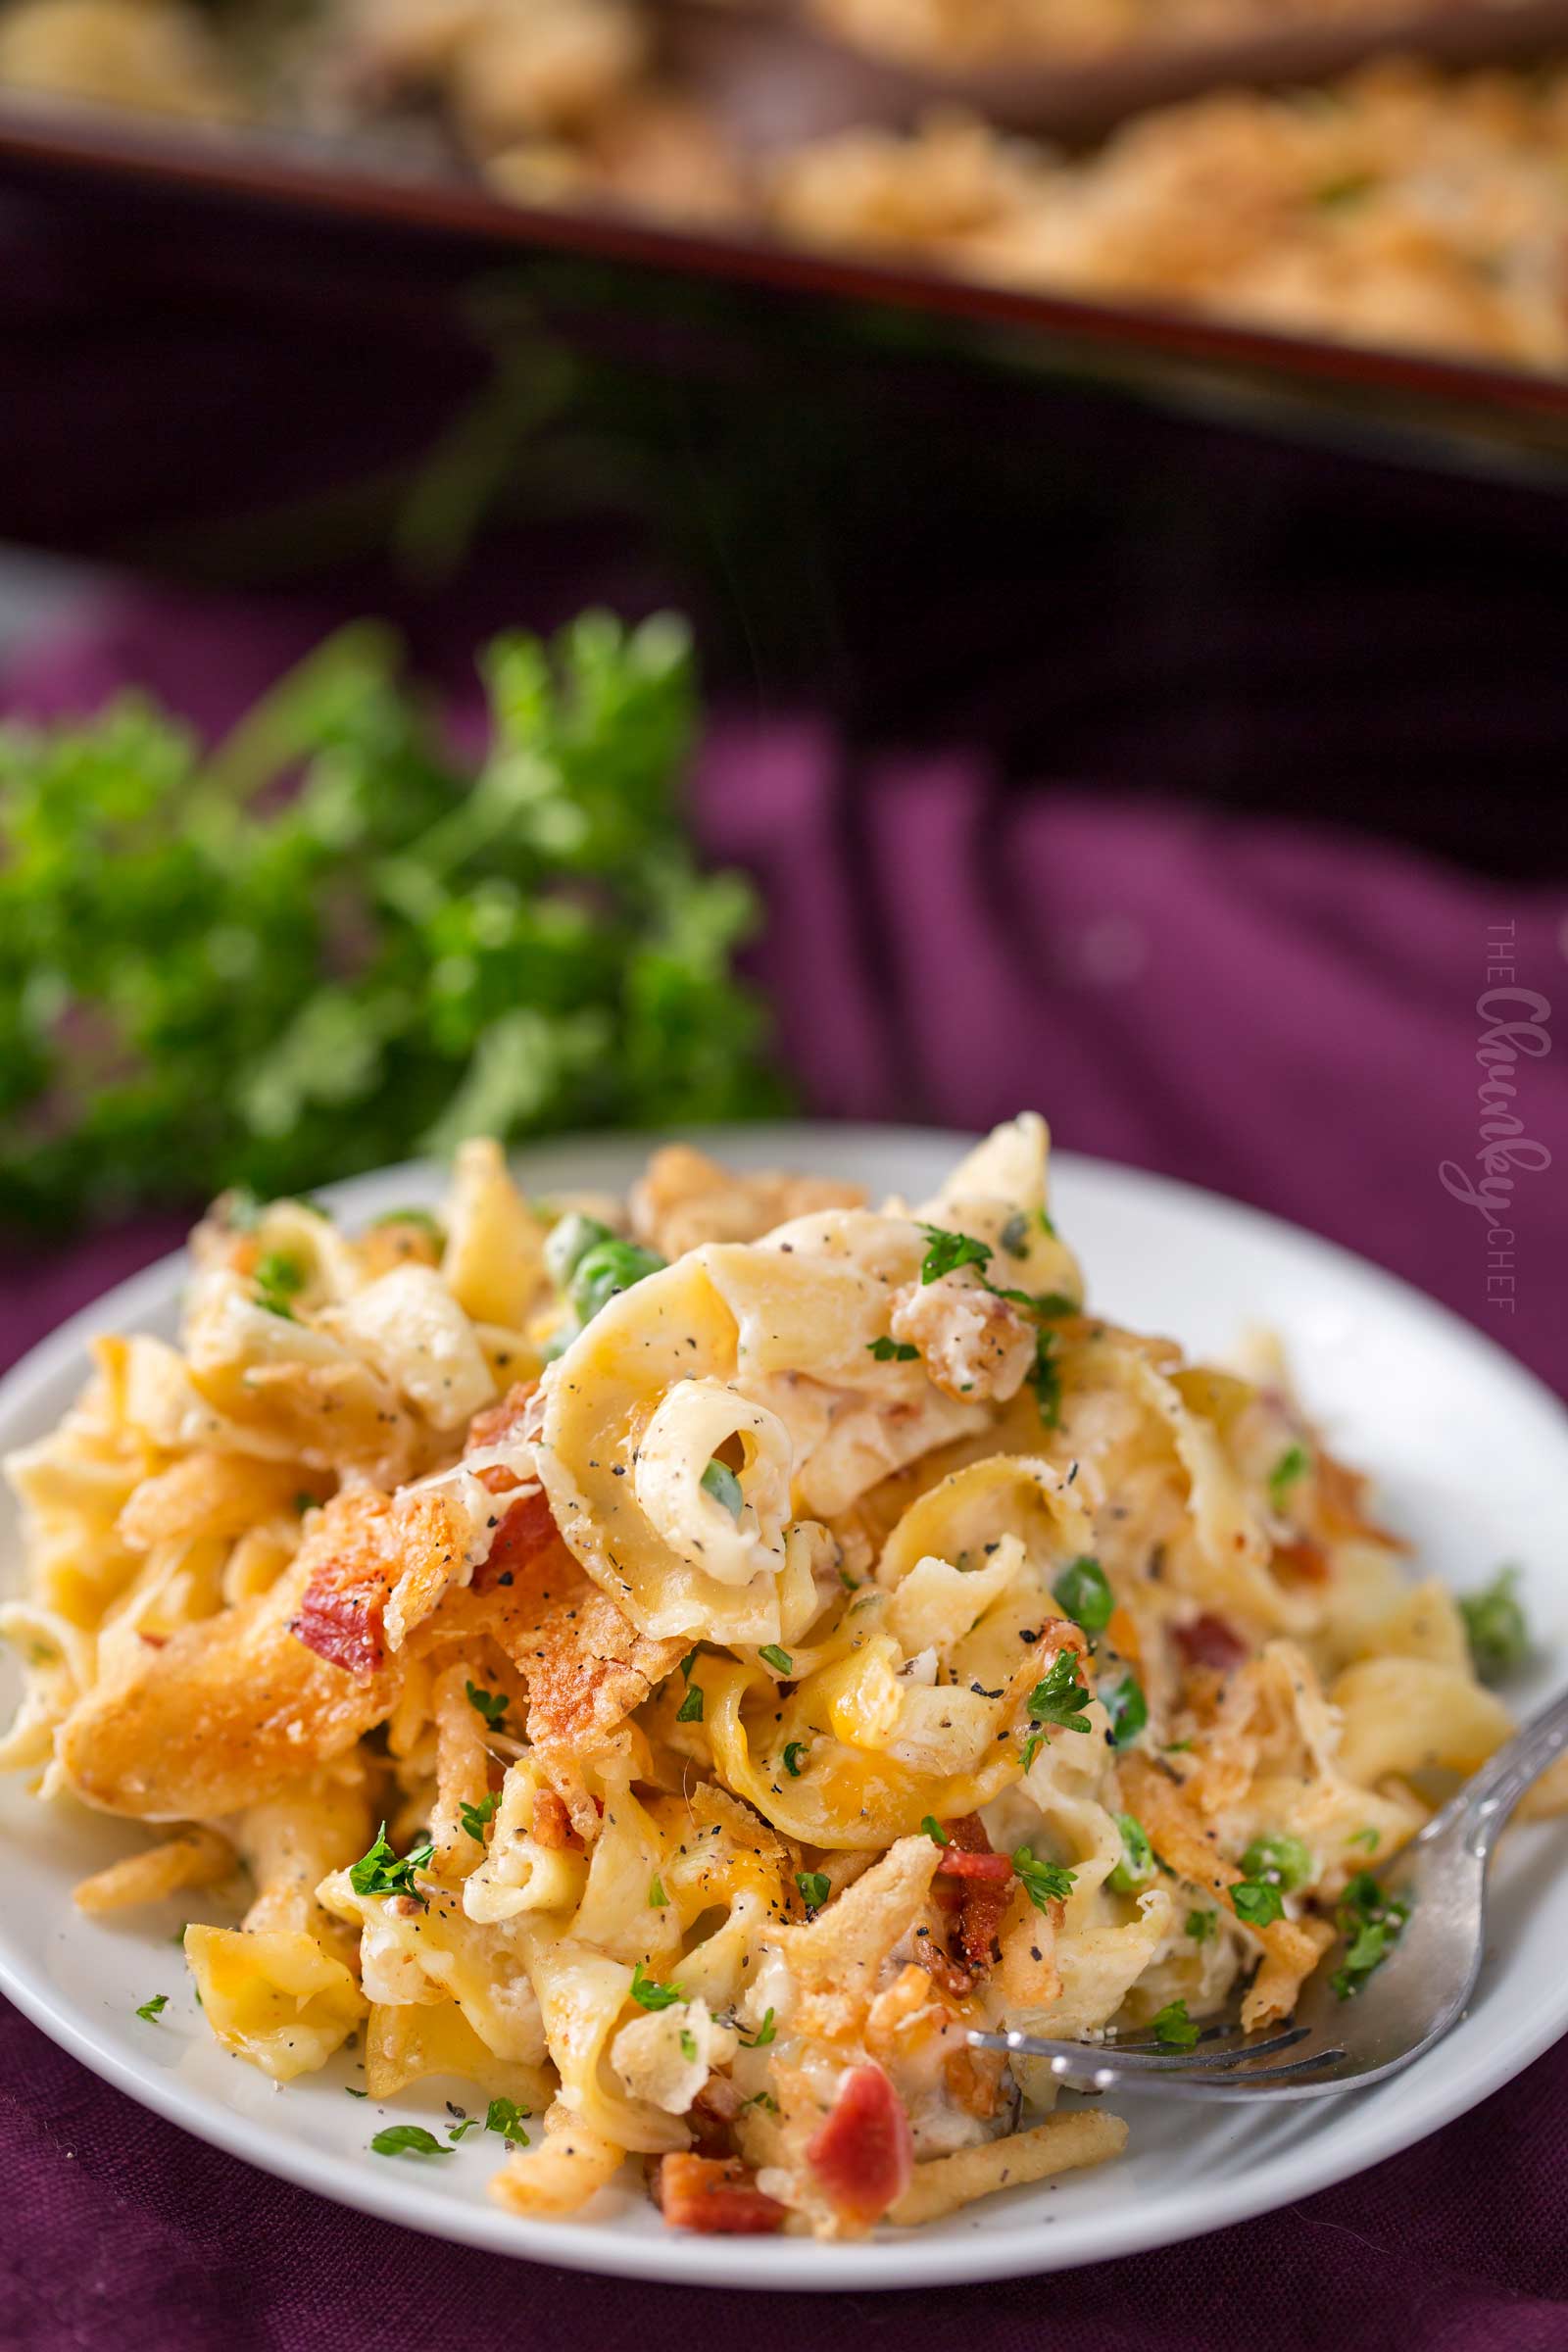 Loaded Cheesy Chicken Noodle Casserole The Chunky Chef